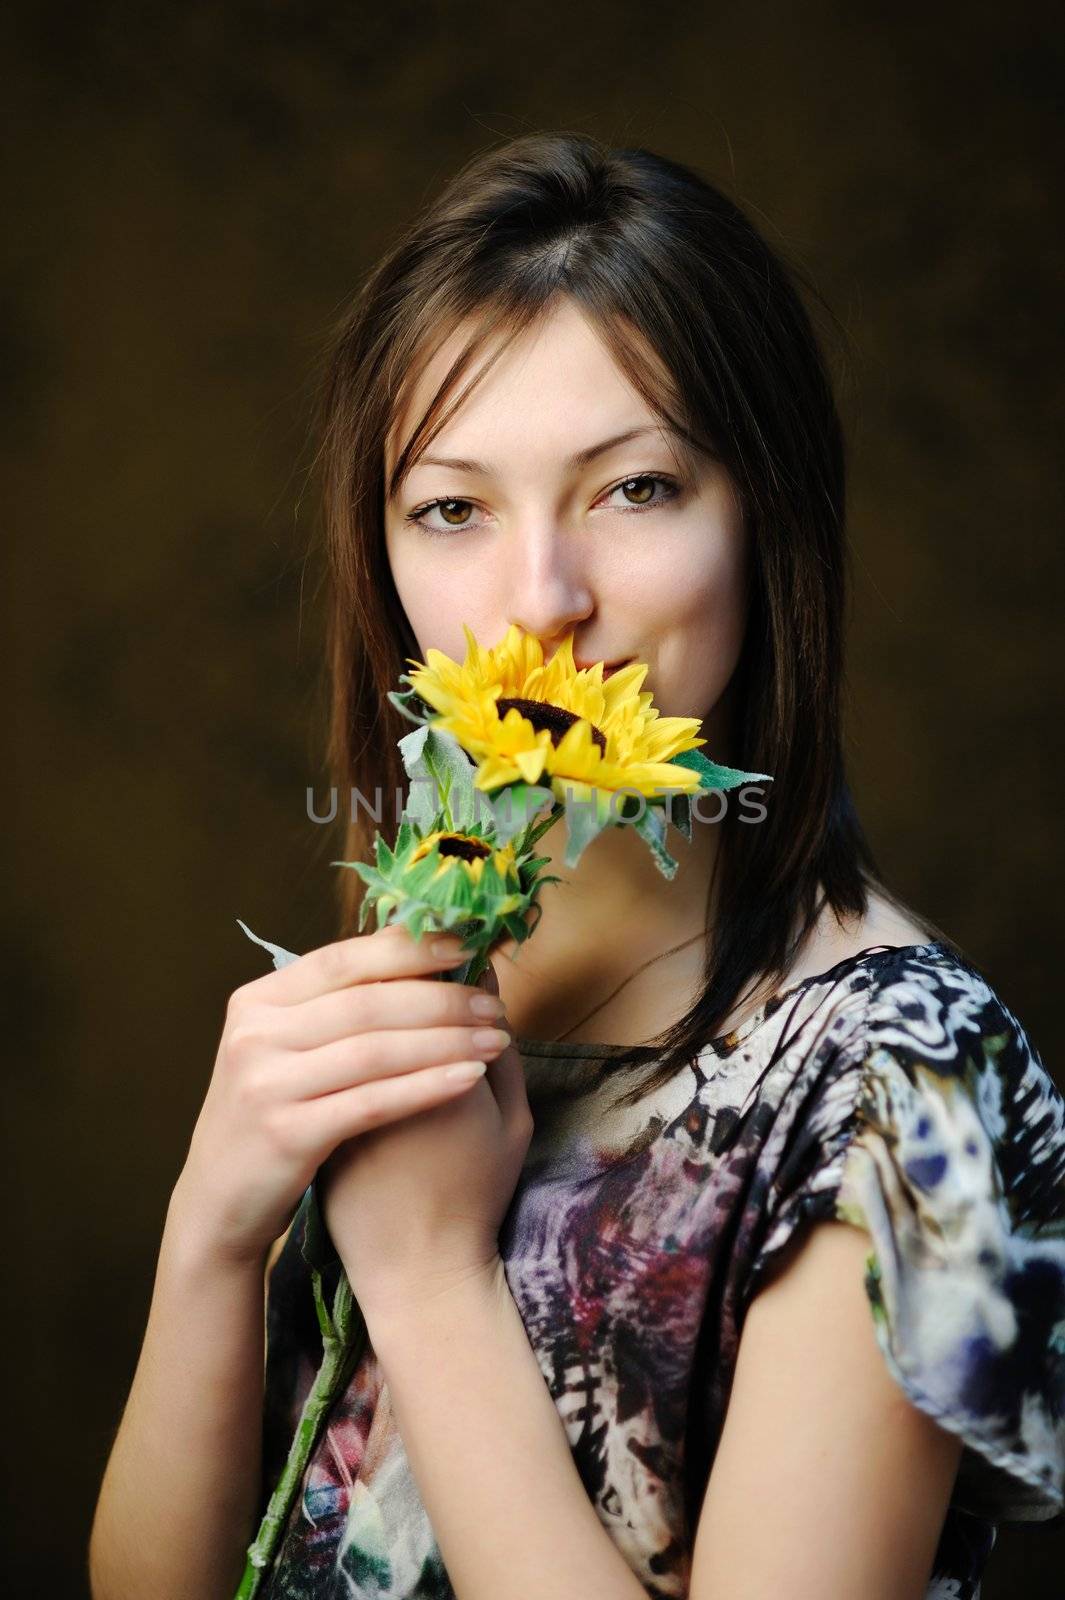 Woman with sunflower by velkol